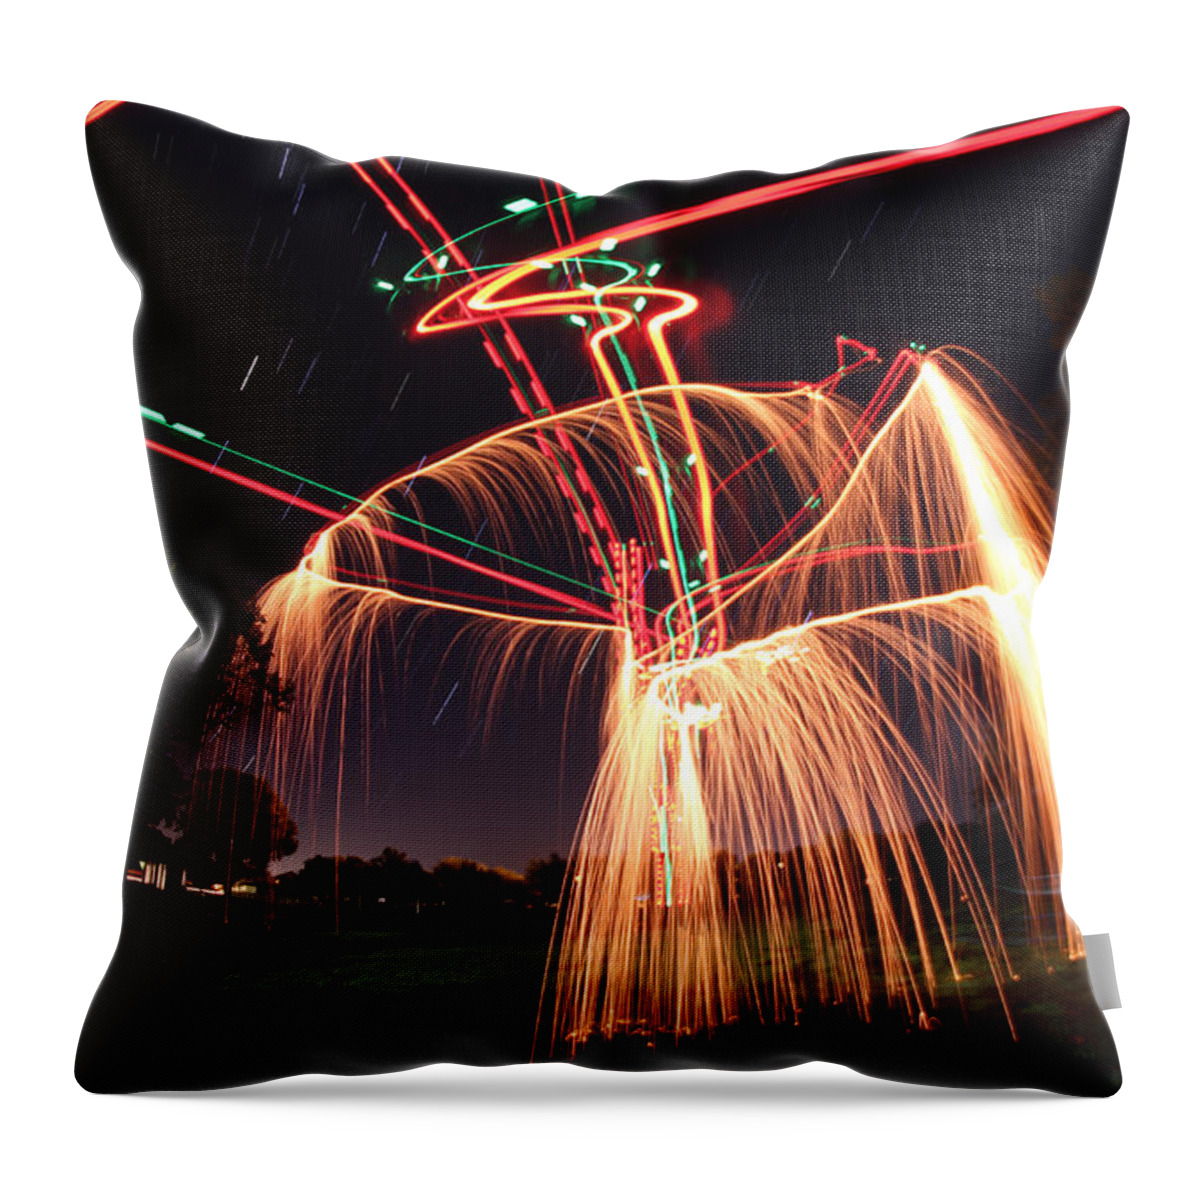 Dancer Throw Pillow featuring the photograph Hula Dancer by Andrew Nourse